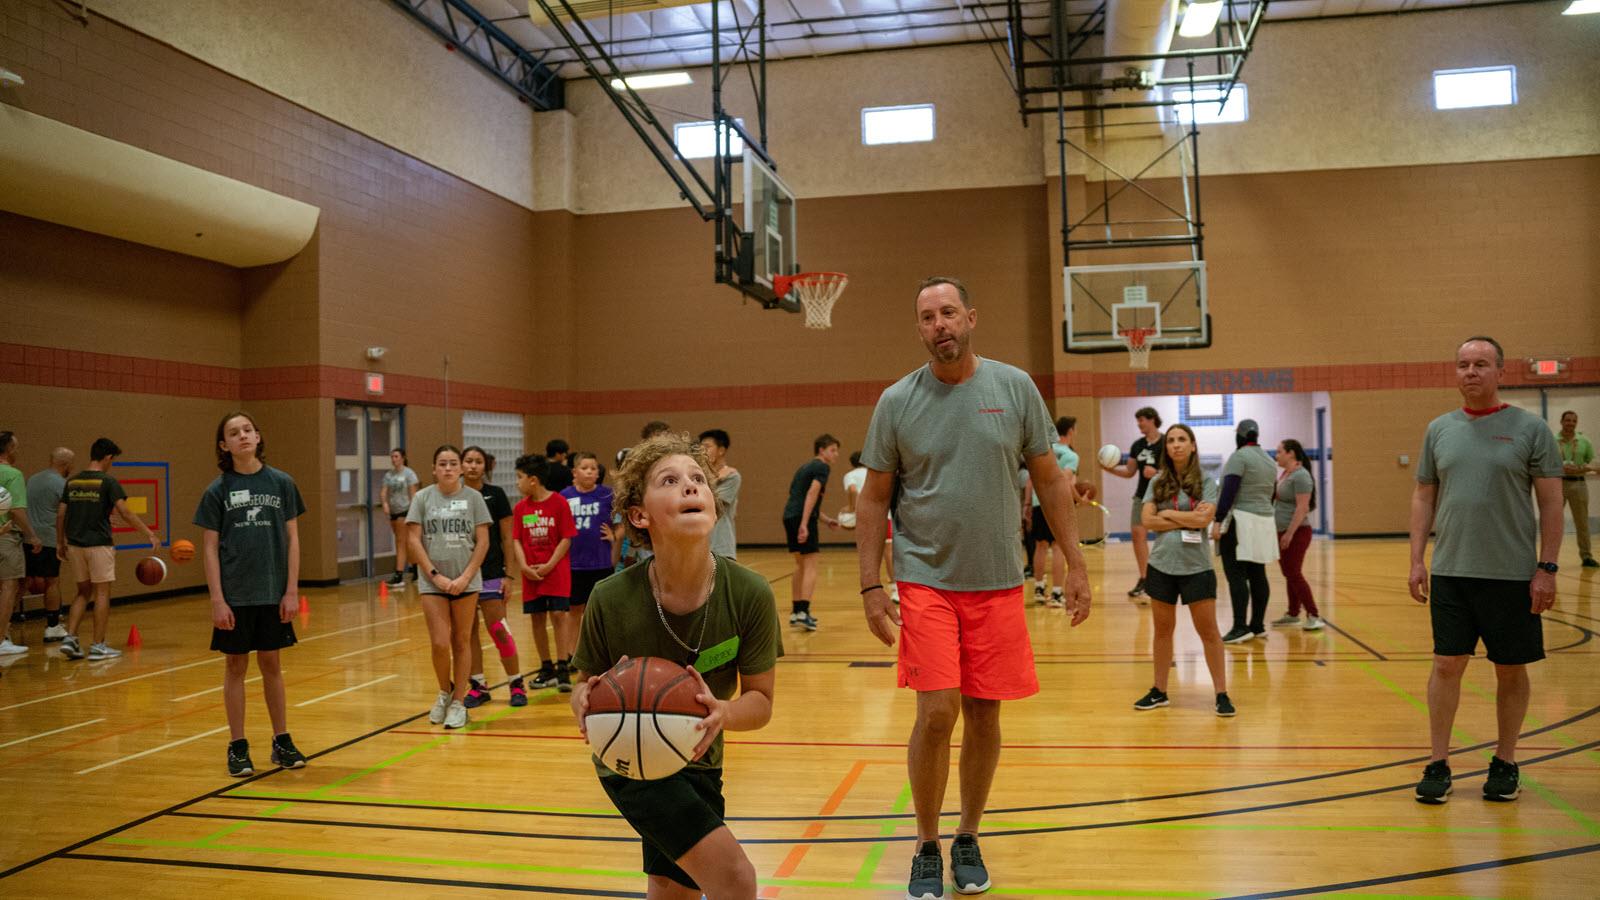 CSL Behring's Bob Lojewski coaches at a youth basketball clinic. A player prepares to shoot.